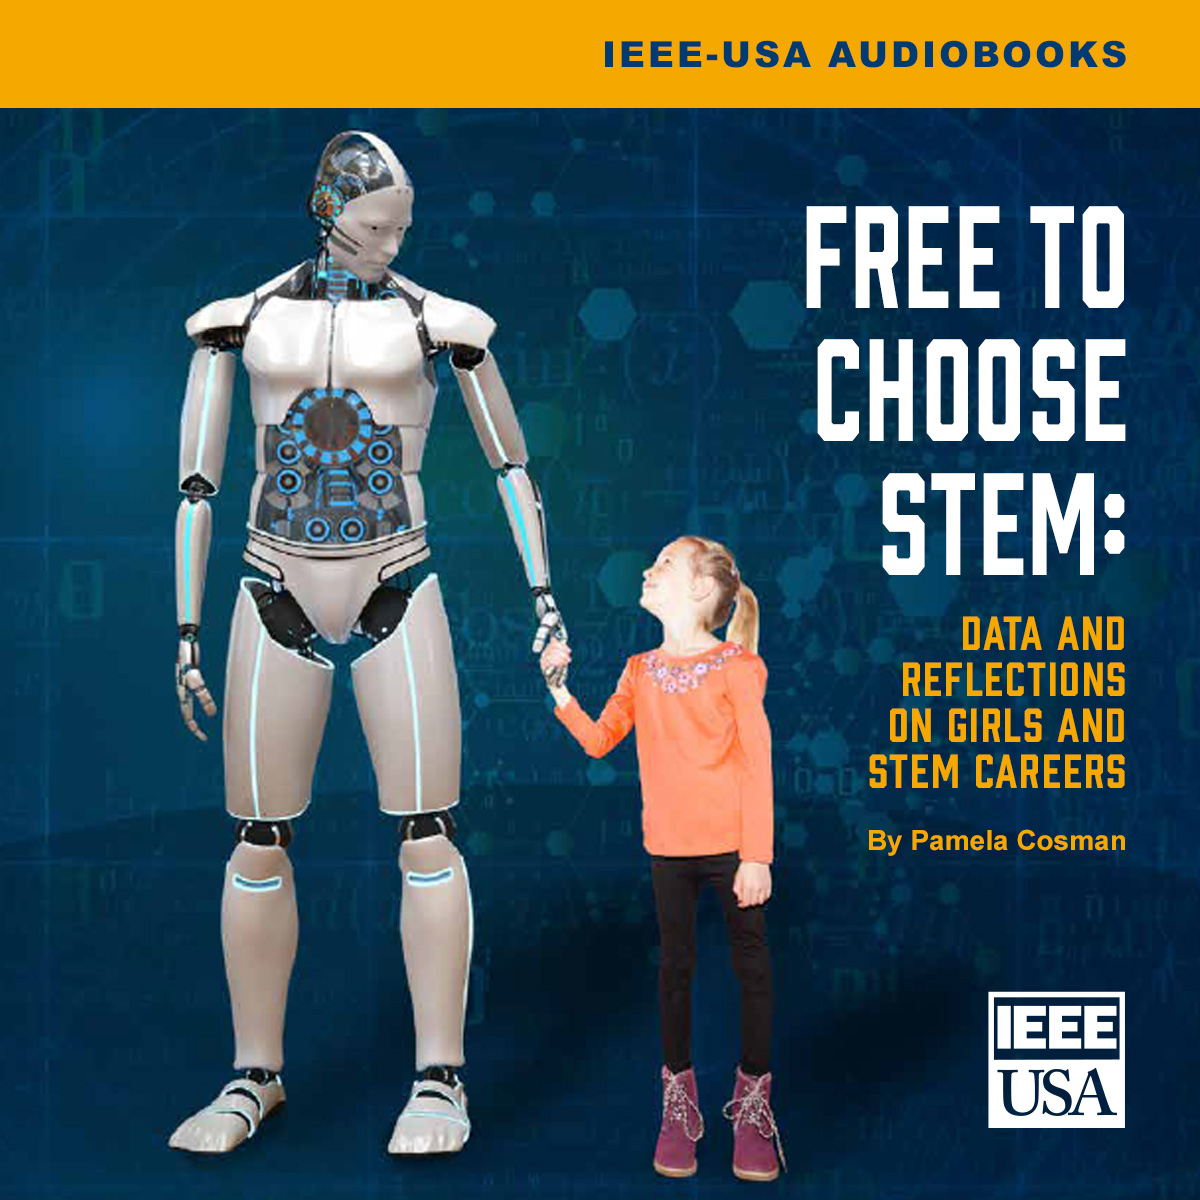 Free to Choose STEM: Data and Reflections on Girls and STEM Careers